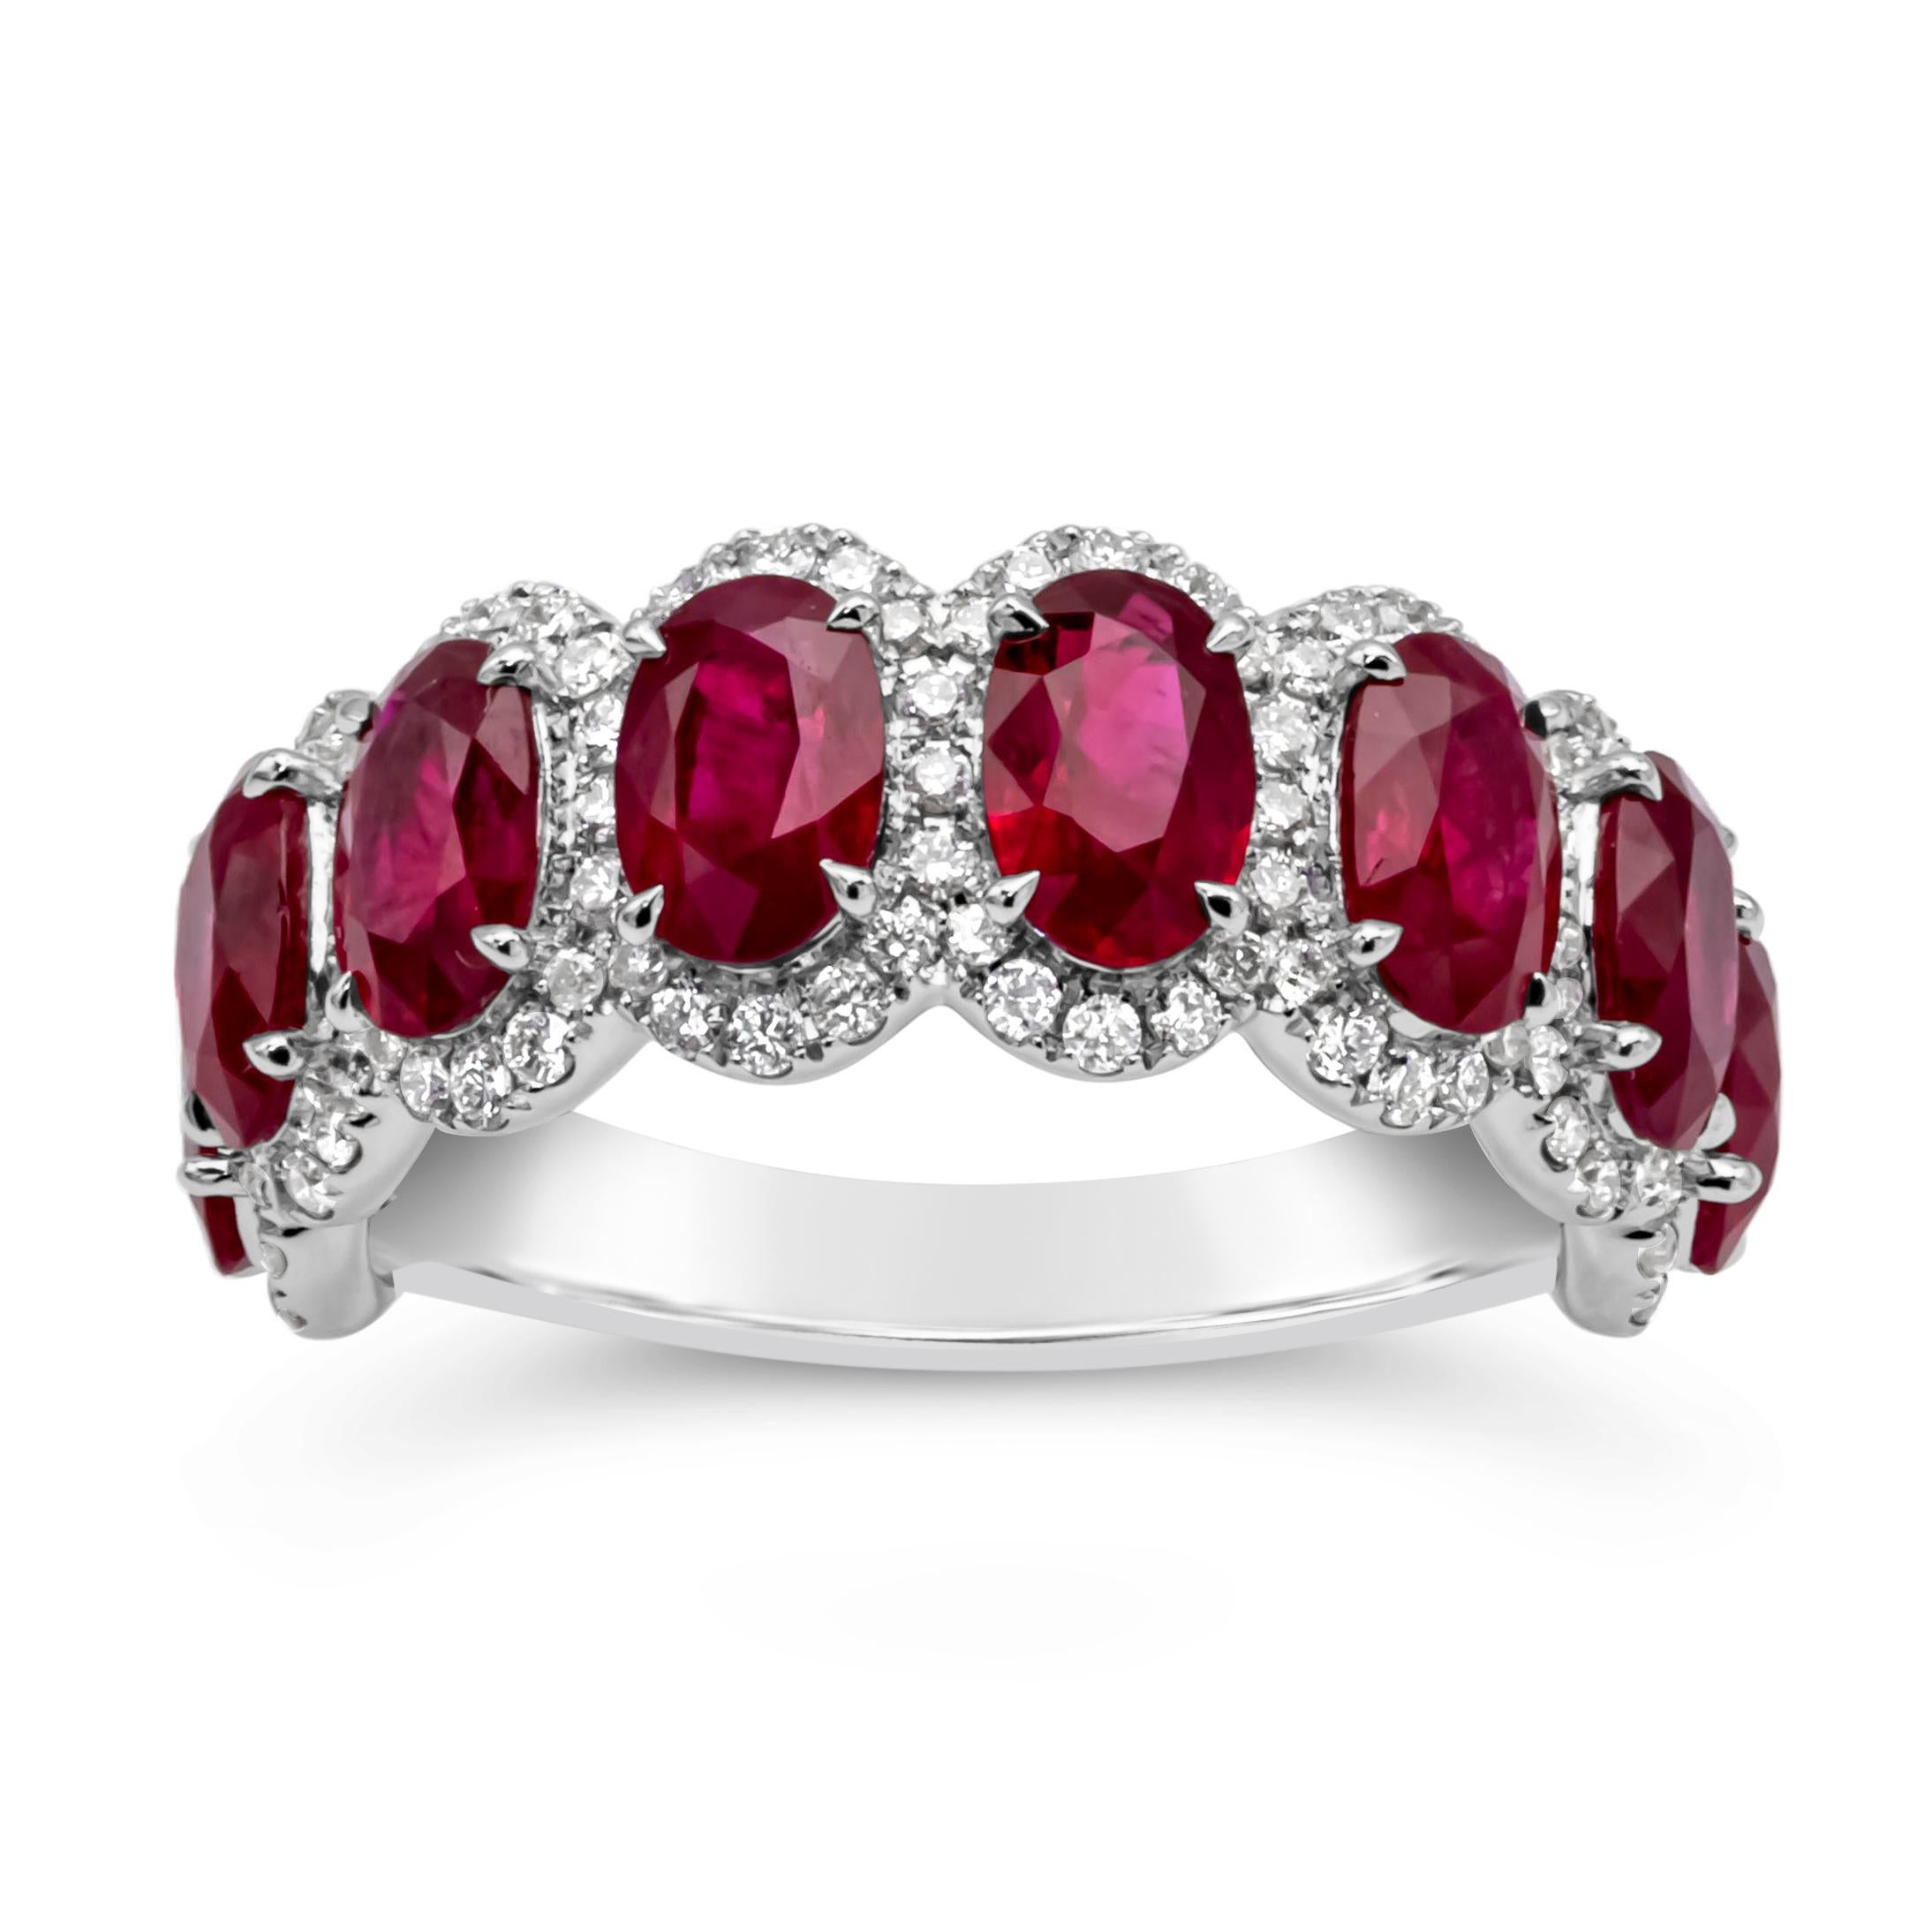 A fascinating gemstone wedding band eight stone style showcasing a row of vibrant oval cut rubies weighing 4.74 carats total, surrounded by brilliant round diamonds in a halo design weighing 0.55 carats, F Color and VS in Clarity. Made in 18K White